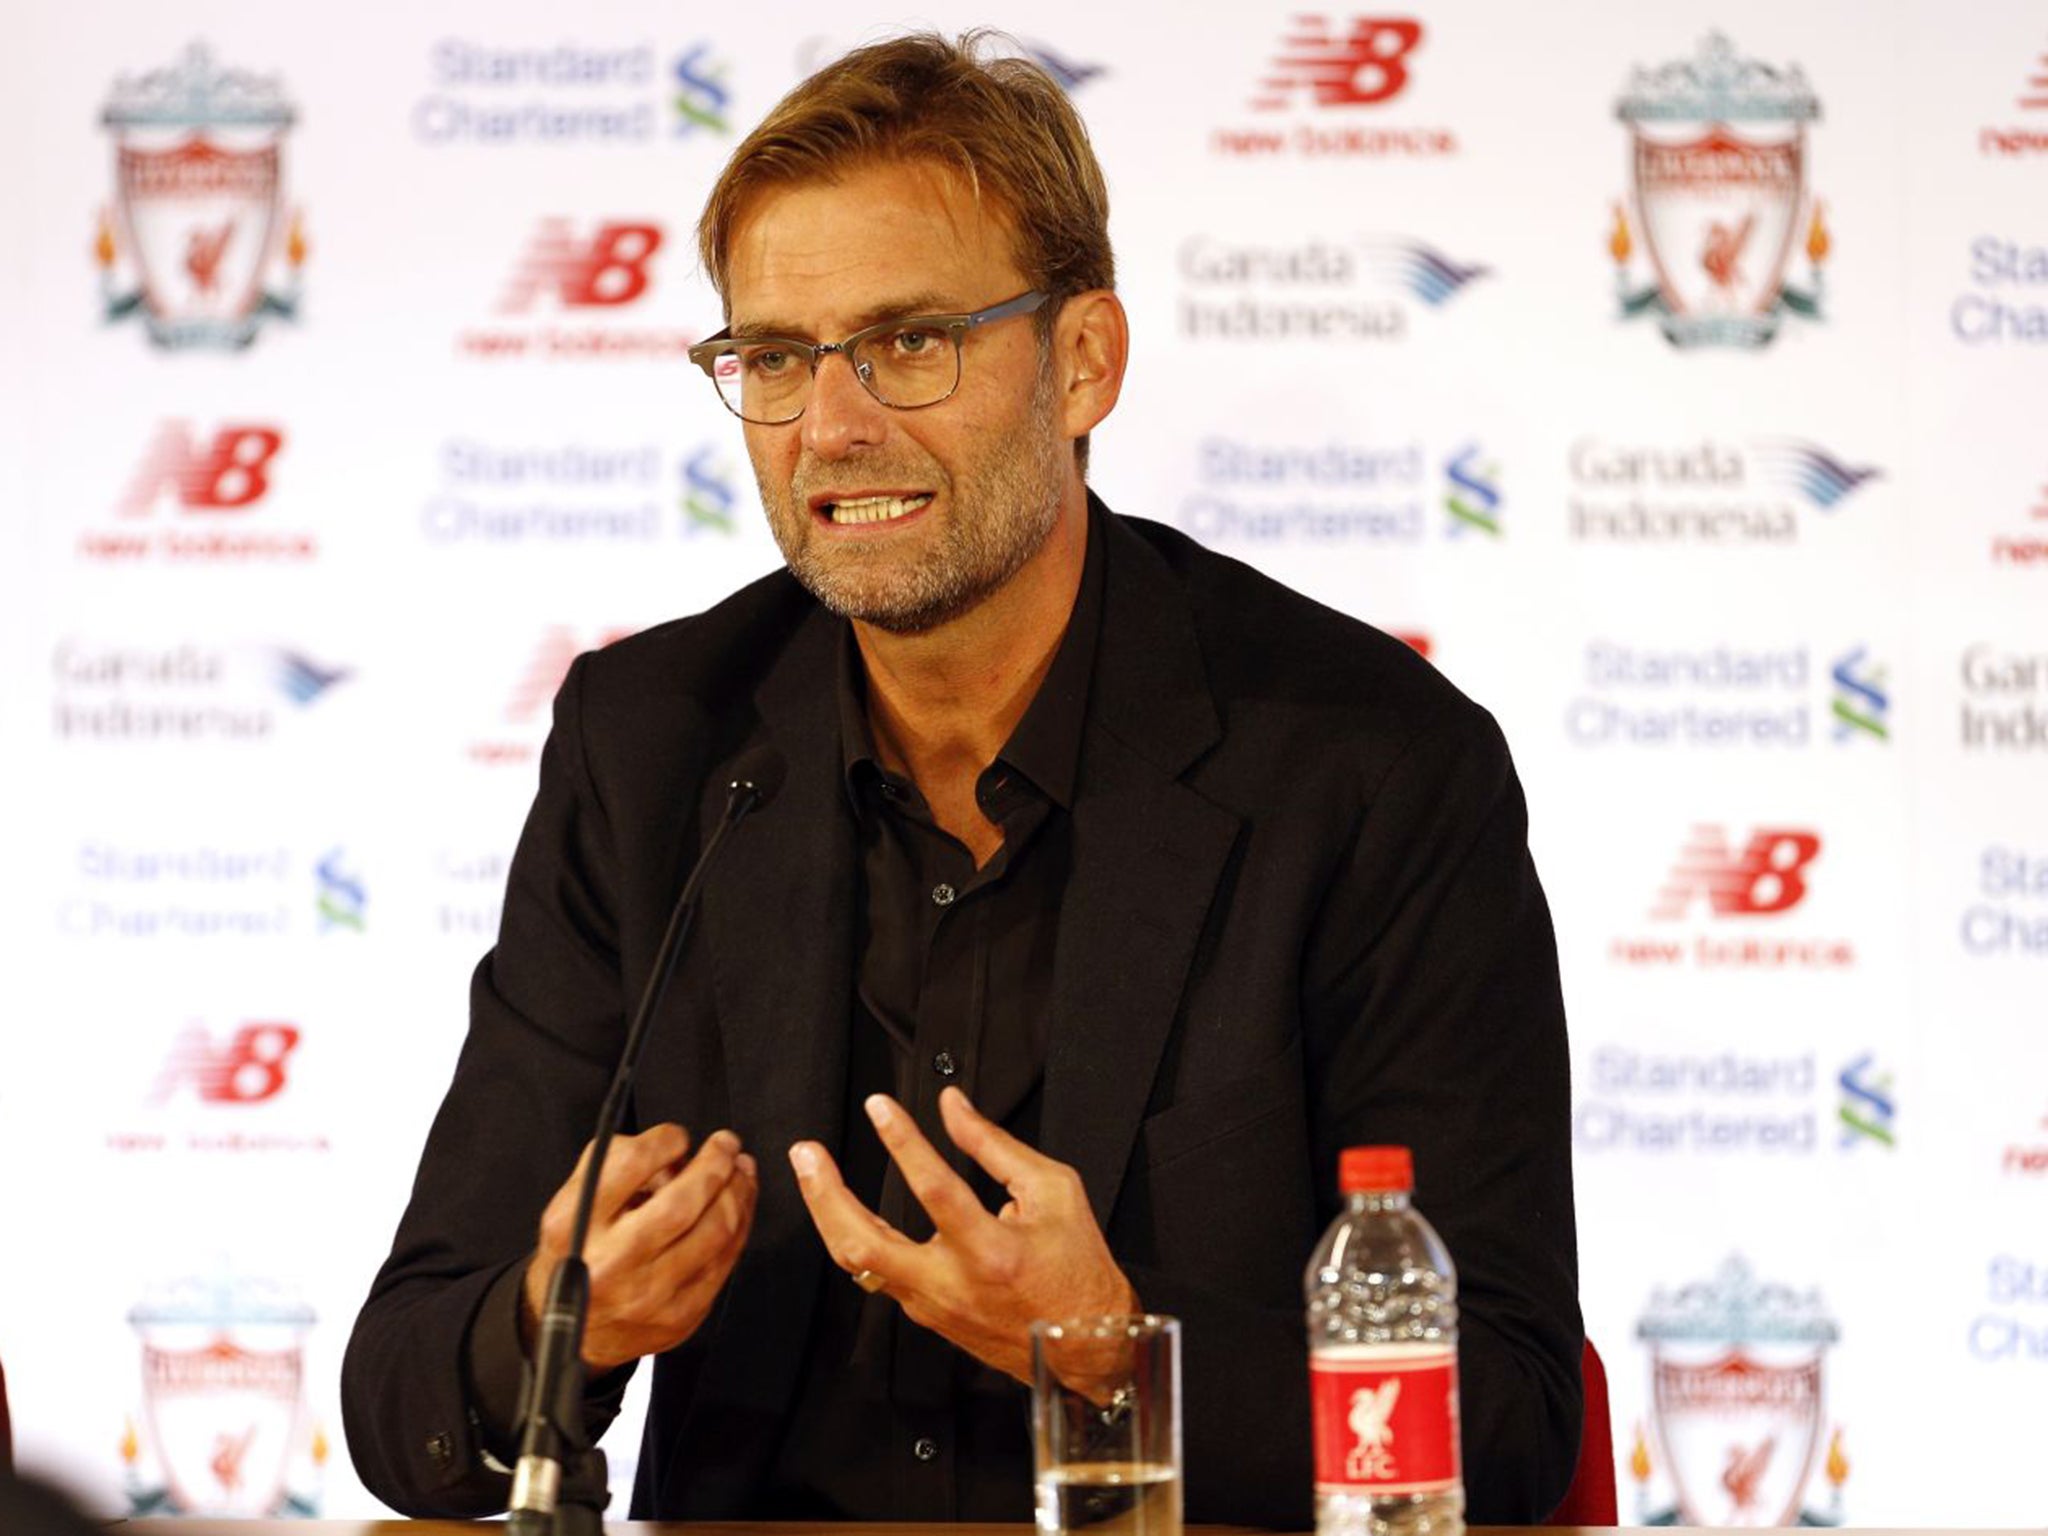 Klopp, above, will have his second assistant Peter Krawietz on the touchline